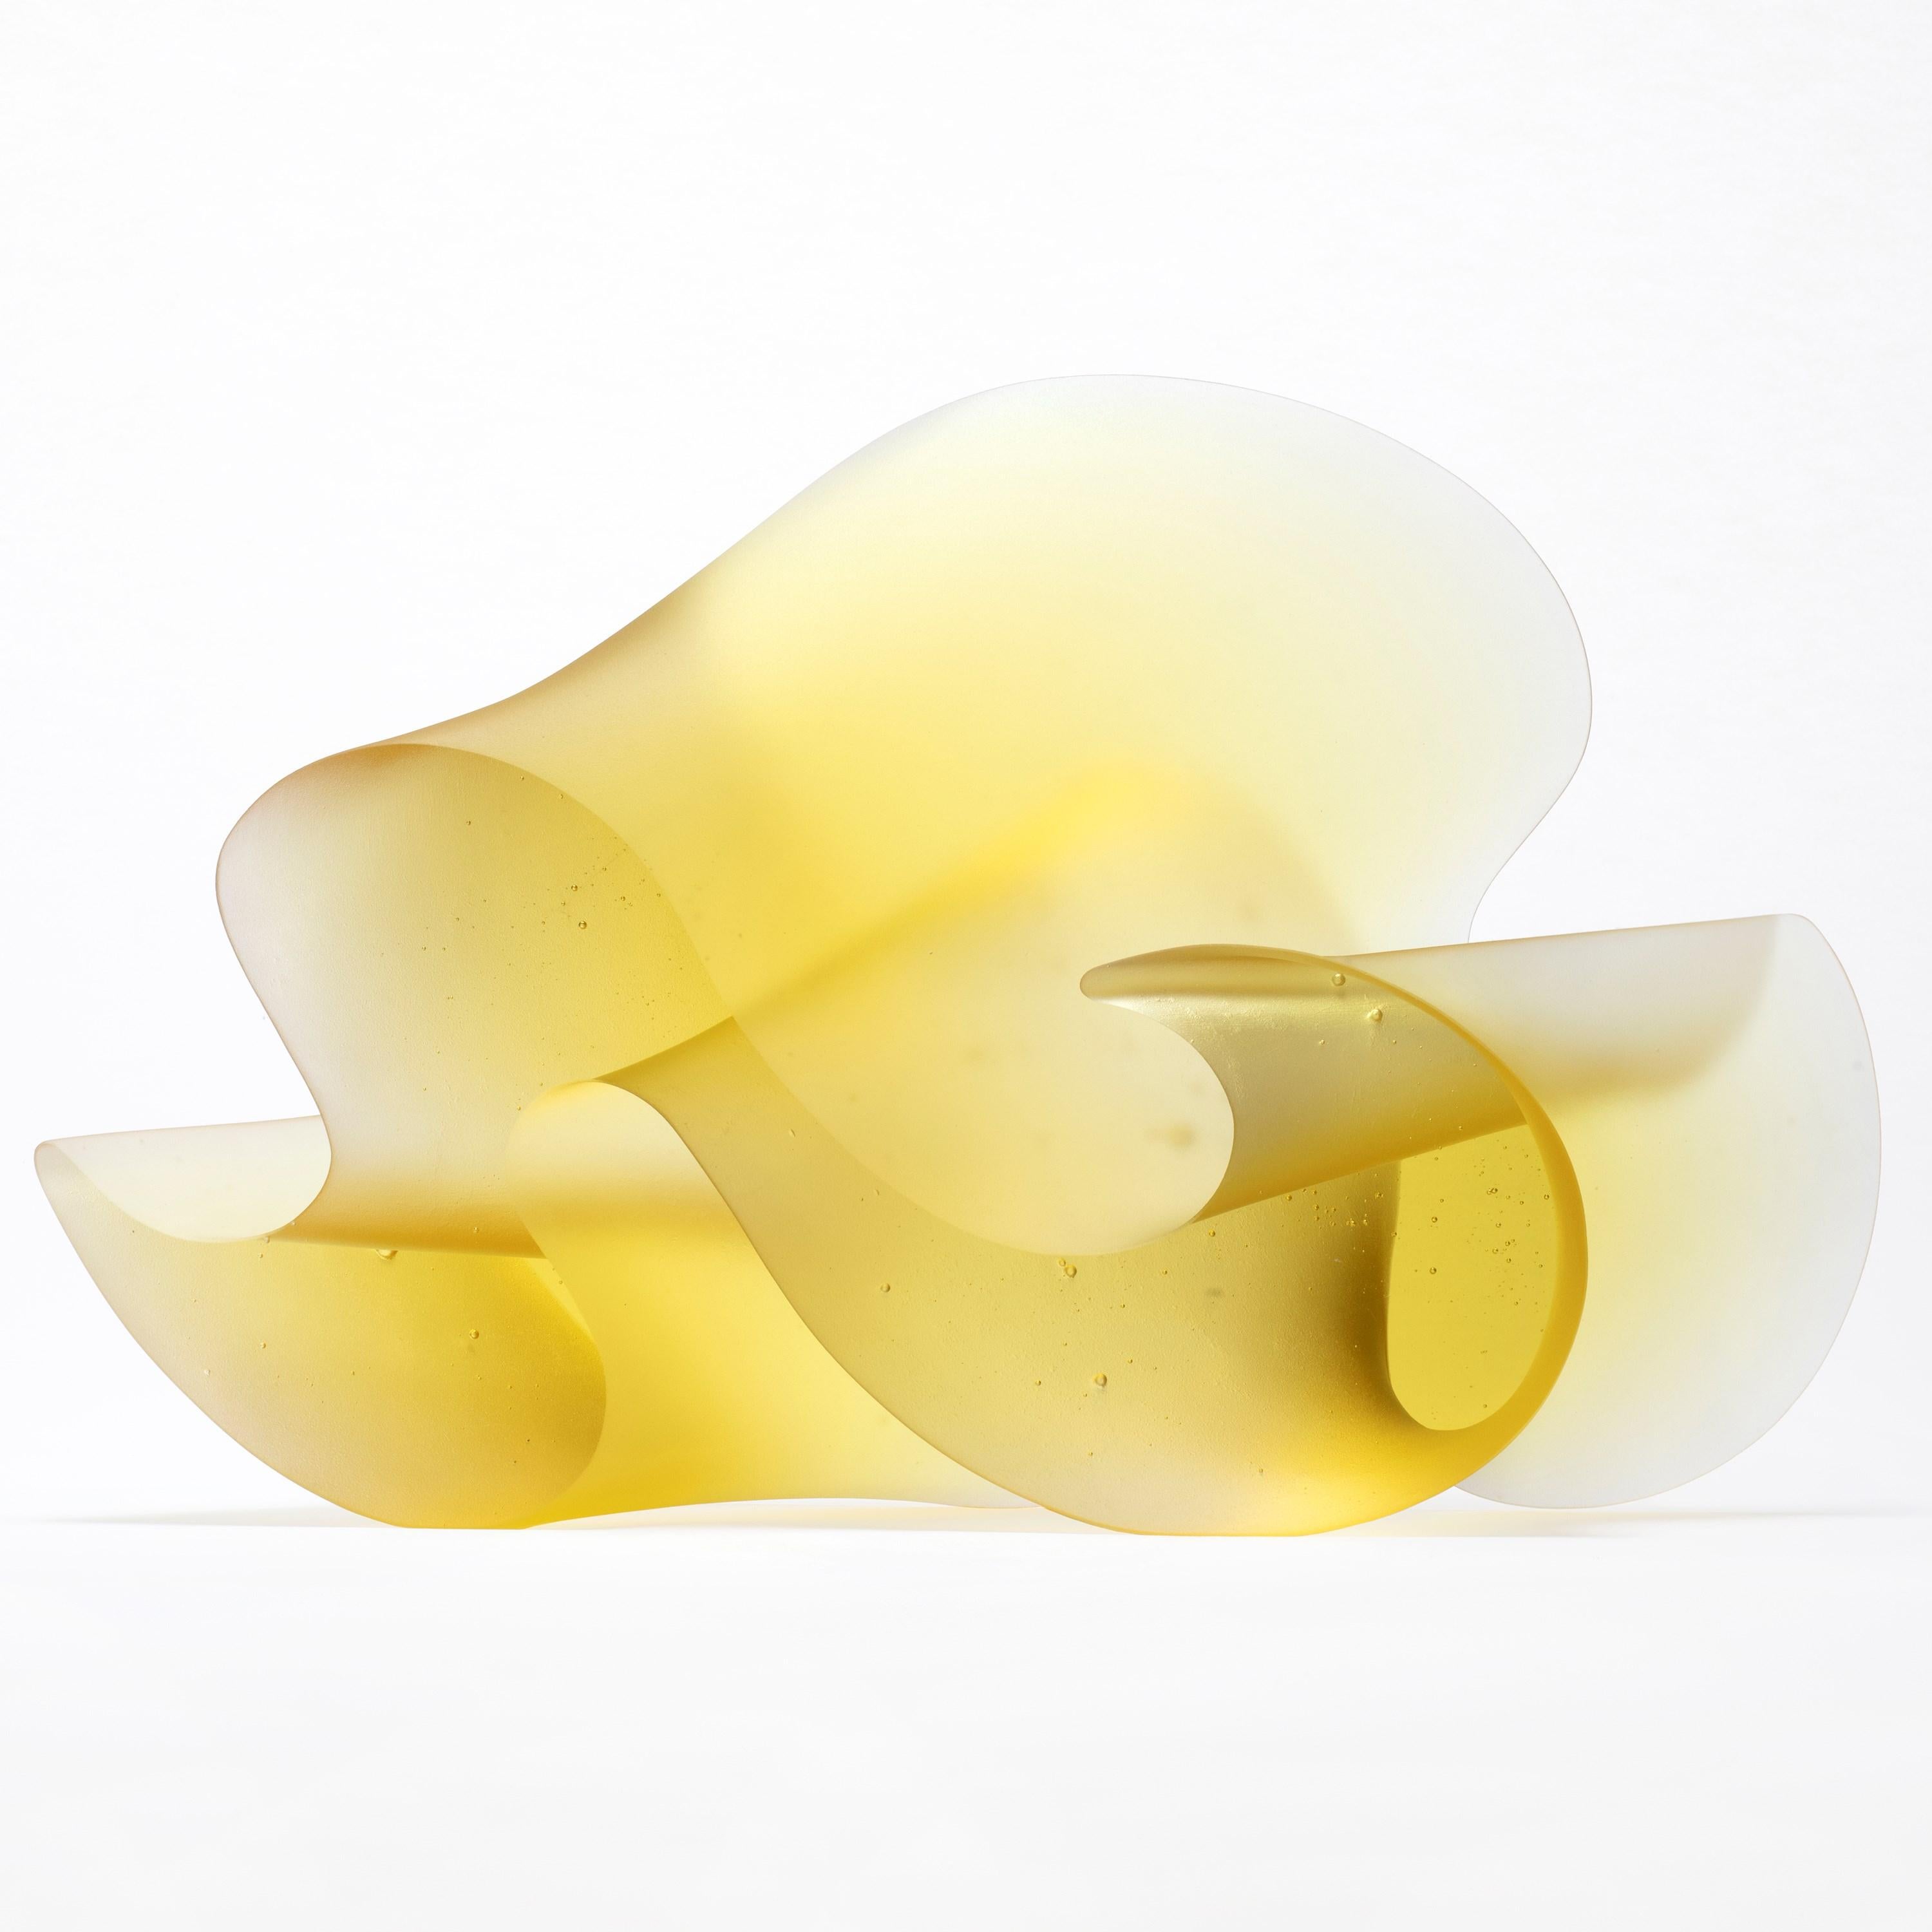 Danish Flow Yellow, a Bright Gold / Yellow Solid Cast Glass Sculpture by Karin Mørch For Sale